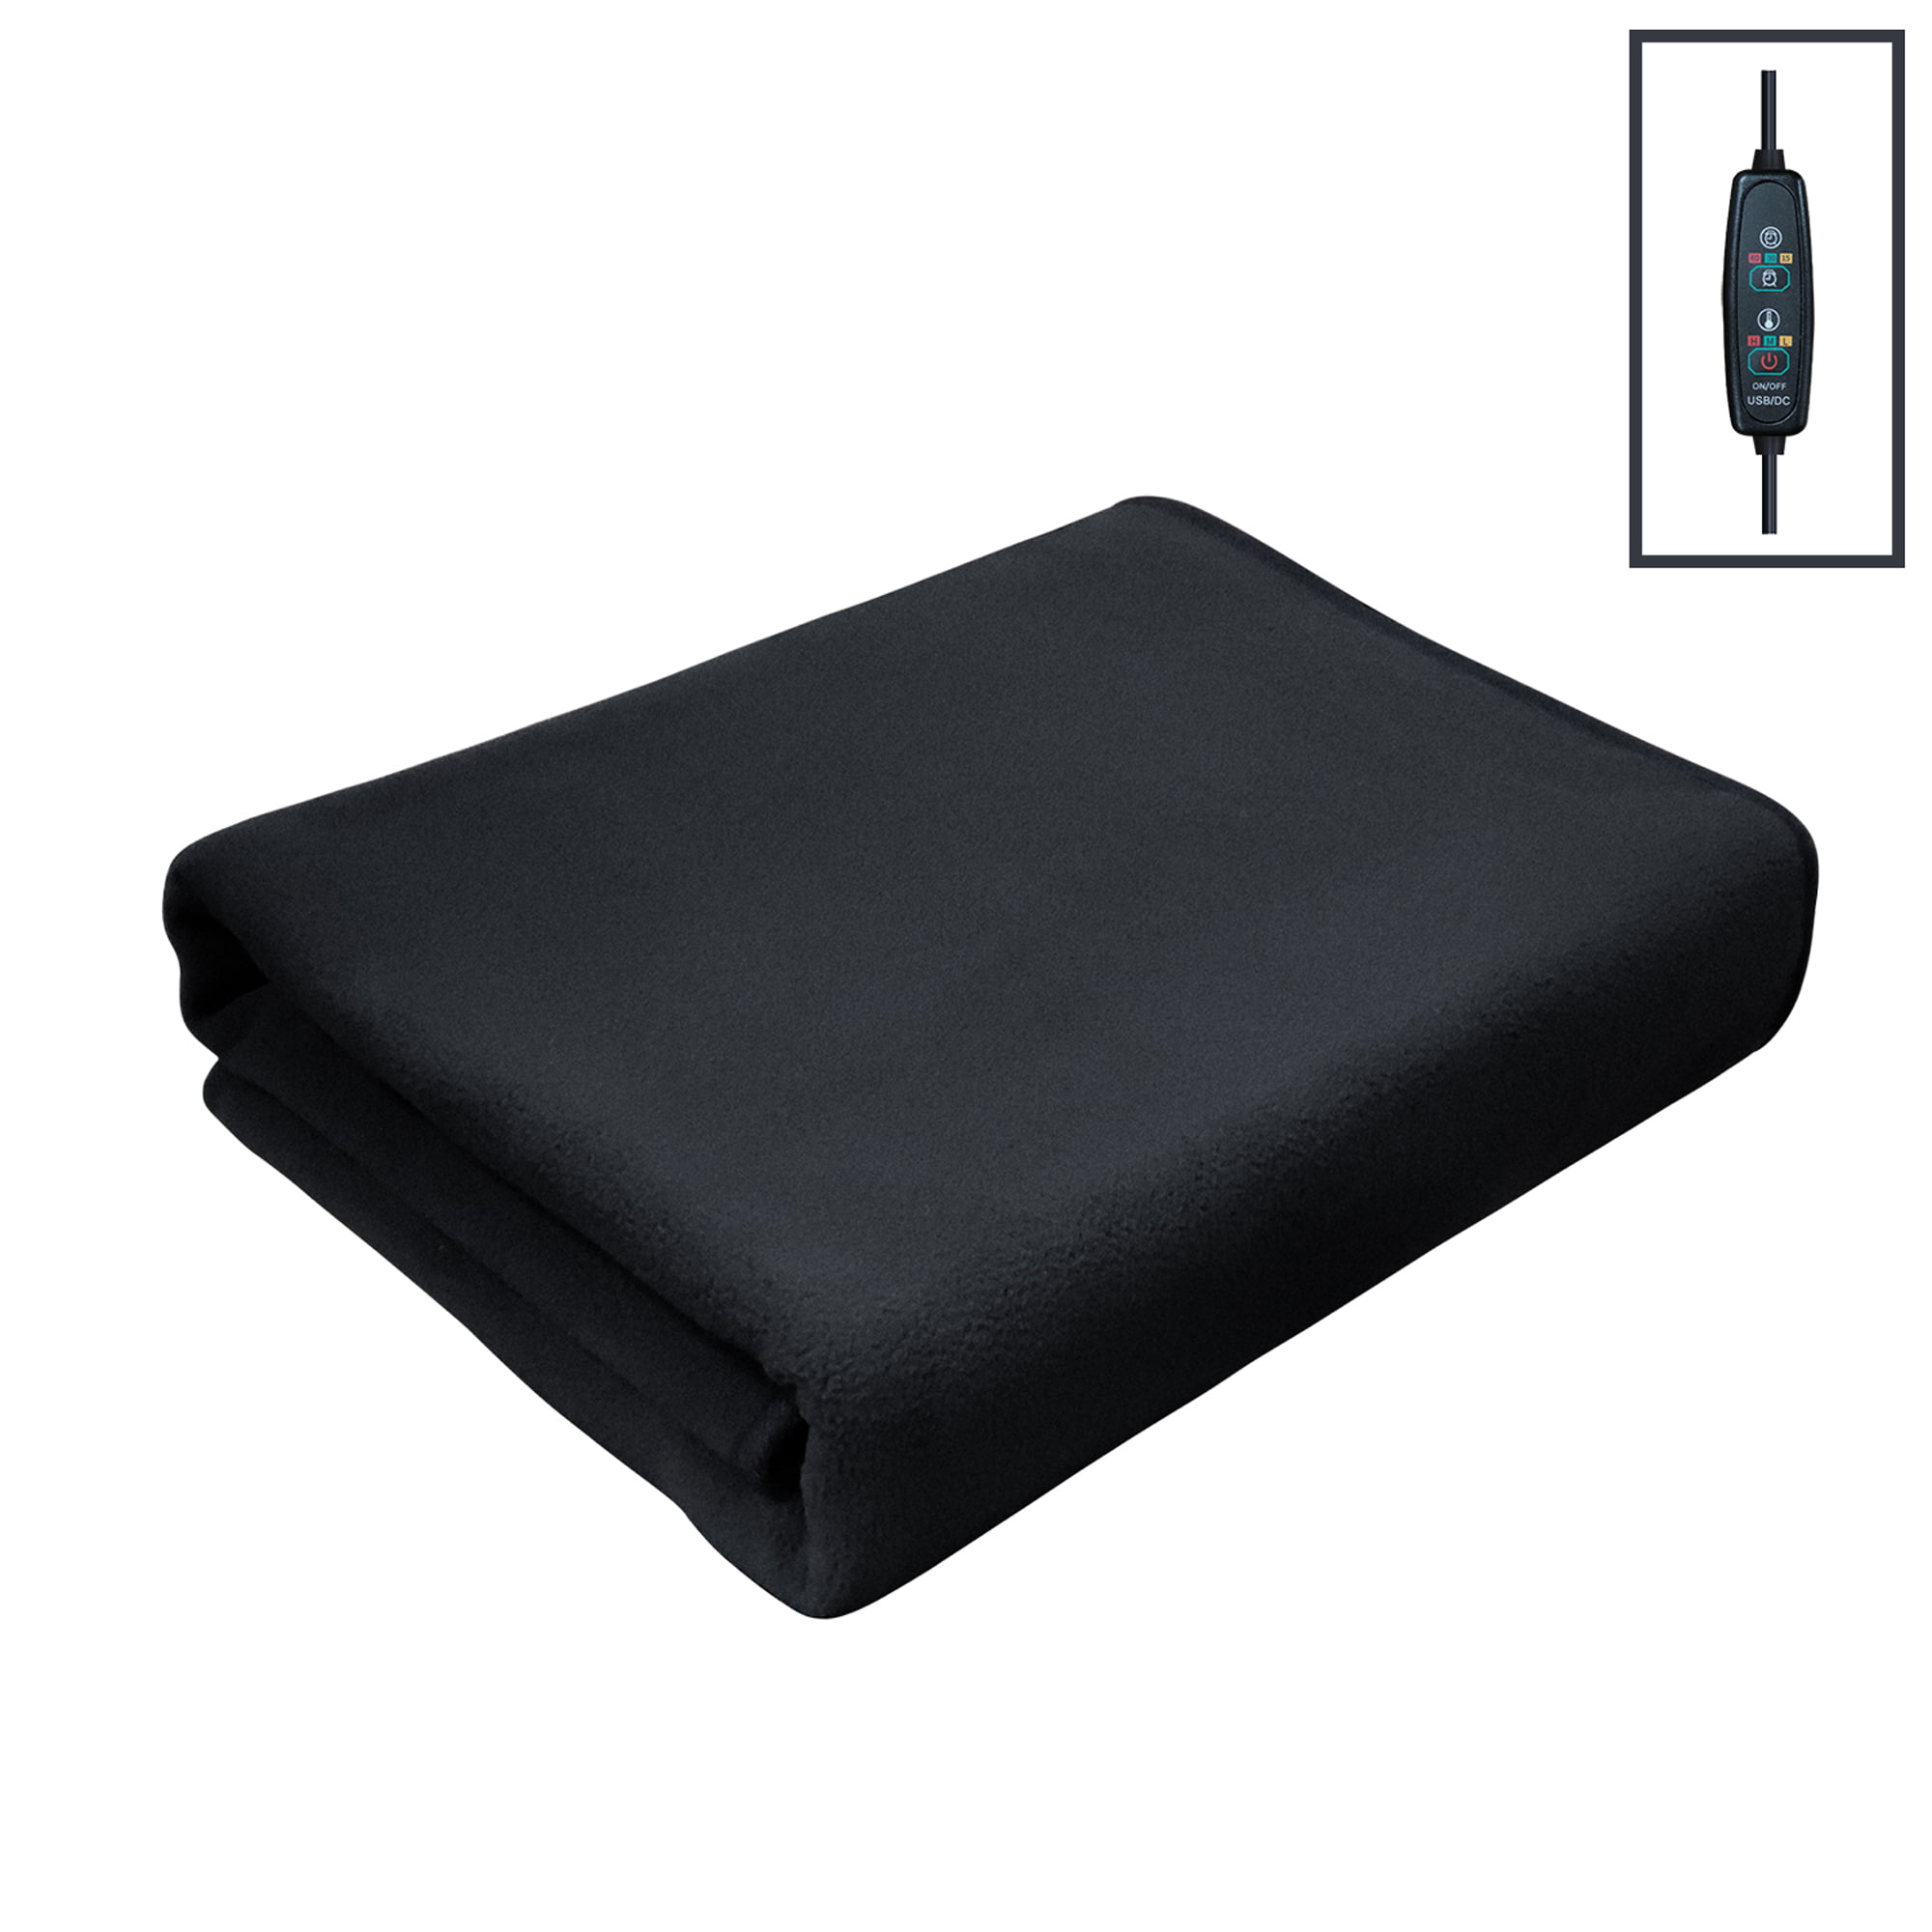 Portable USB Powered Electric Heated Blanket Soft Snuggle Wrap Heated Knee Cover for Home or Office Heated Throw Blanket 